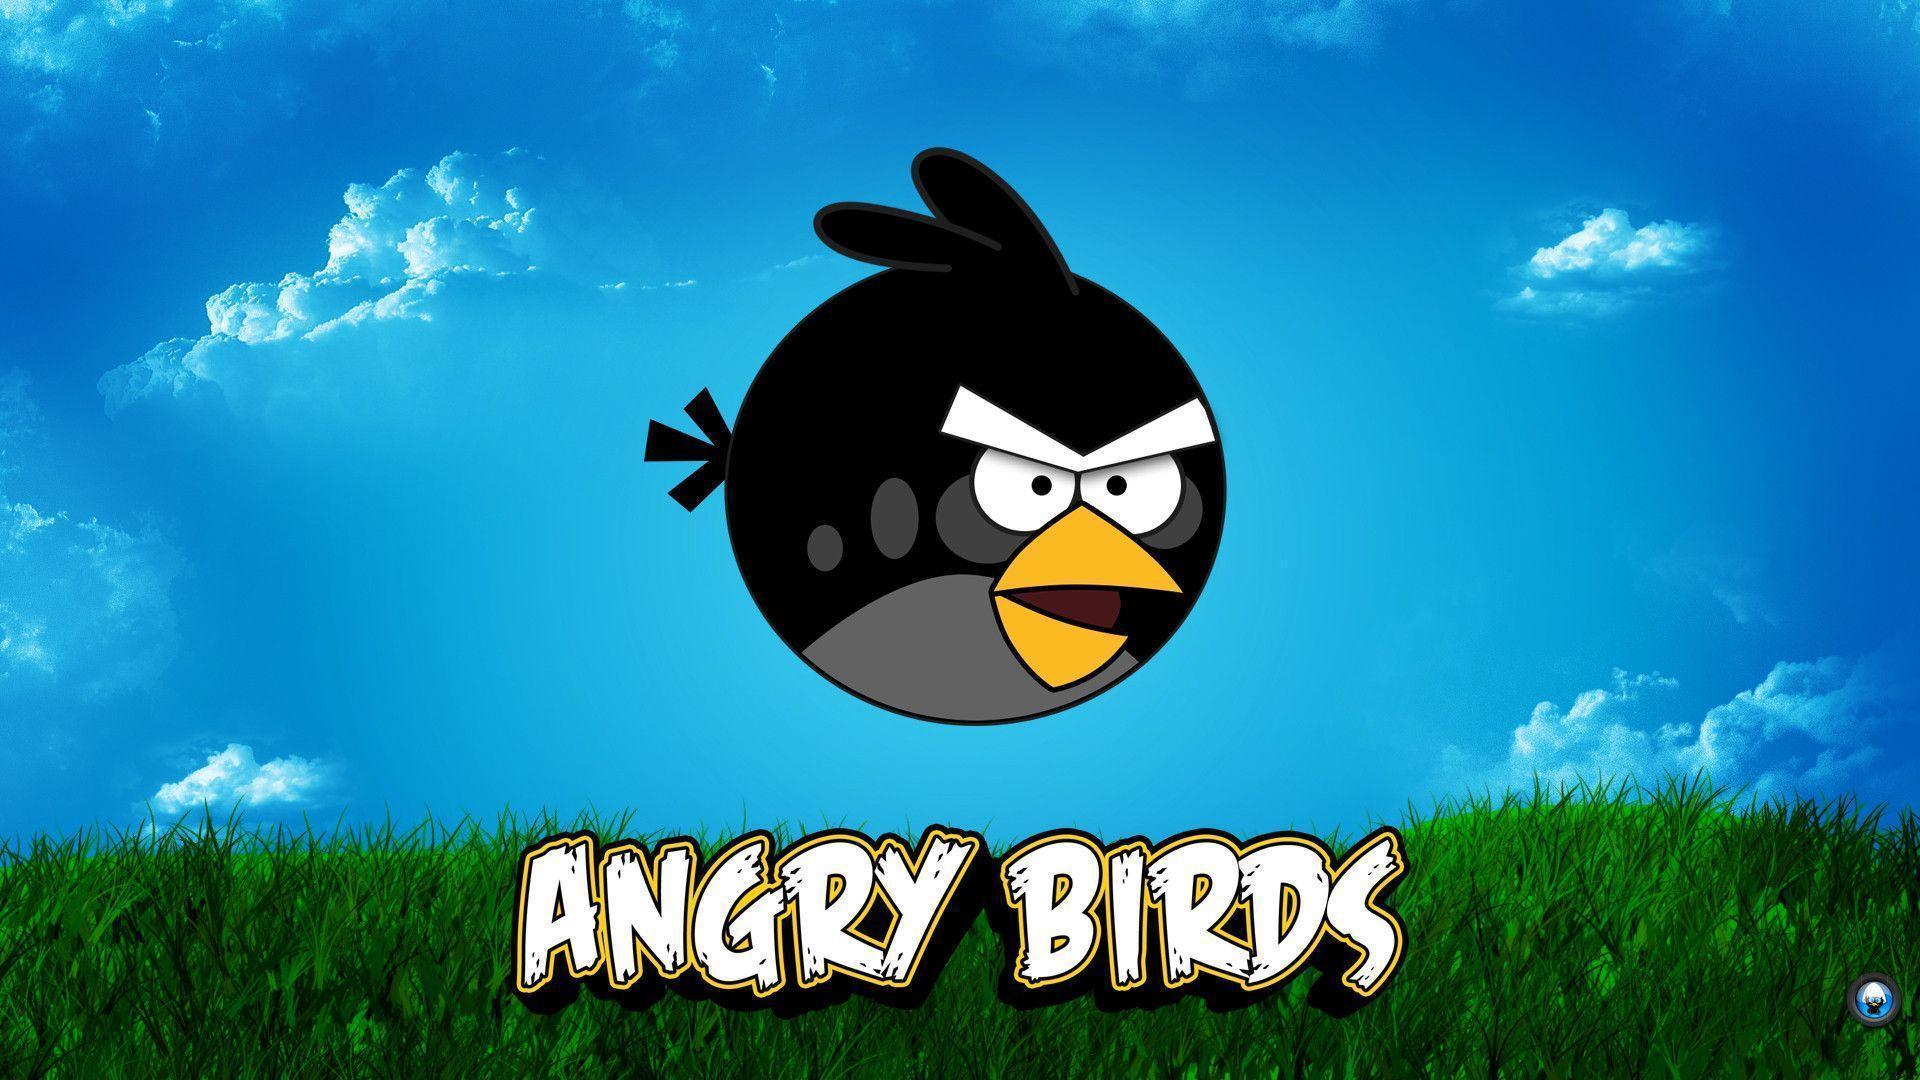 Angry Birds Space Wallpaper HD 1080p